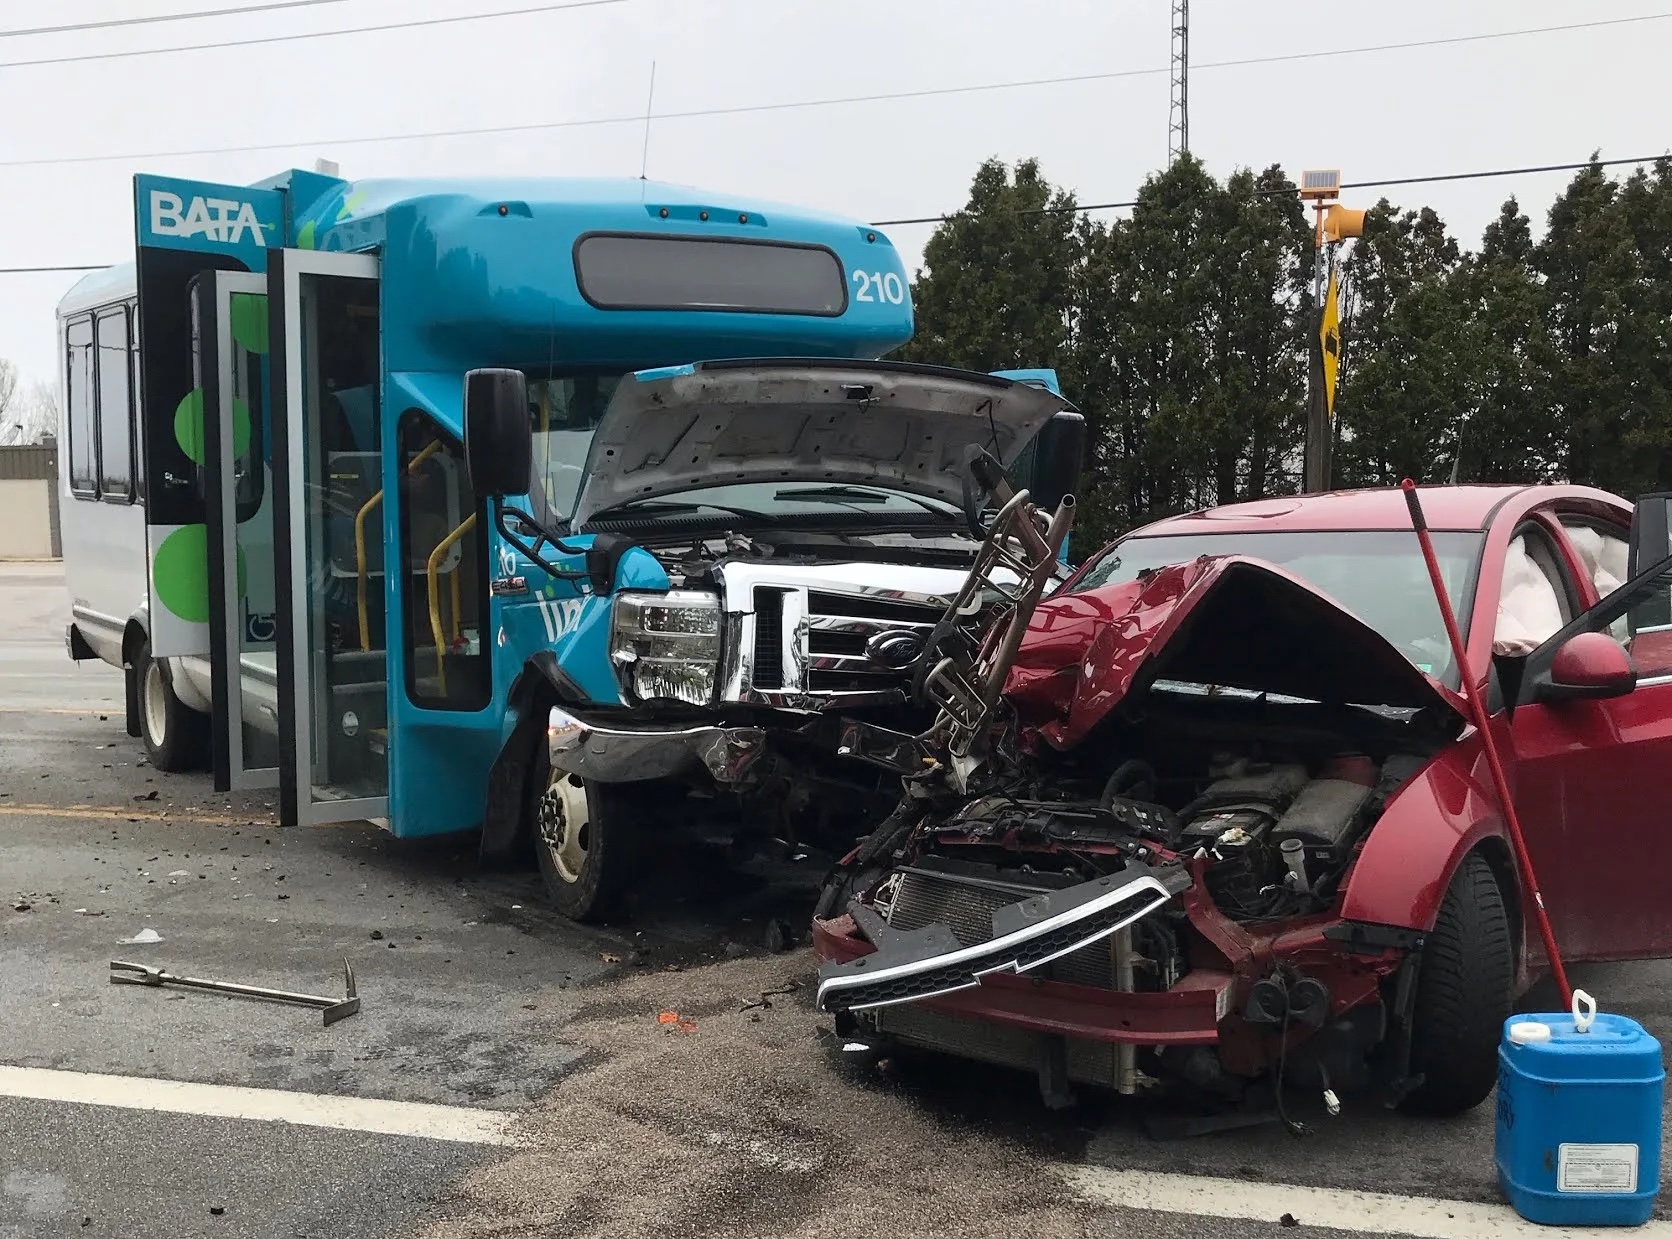 Man Hijacks BATA Bus, Gets In Accident | The Ticker